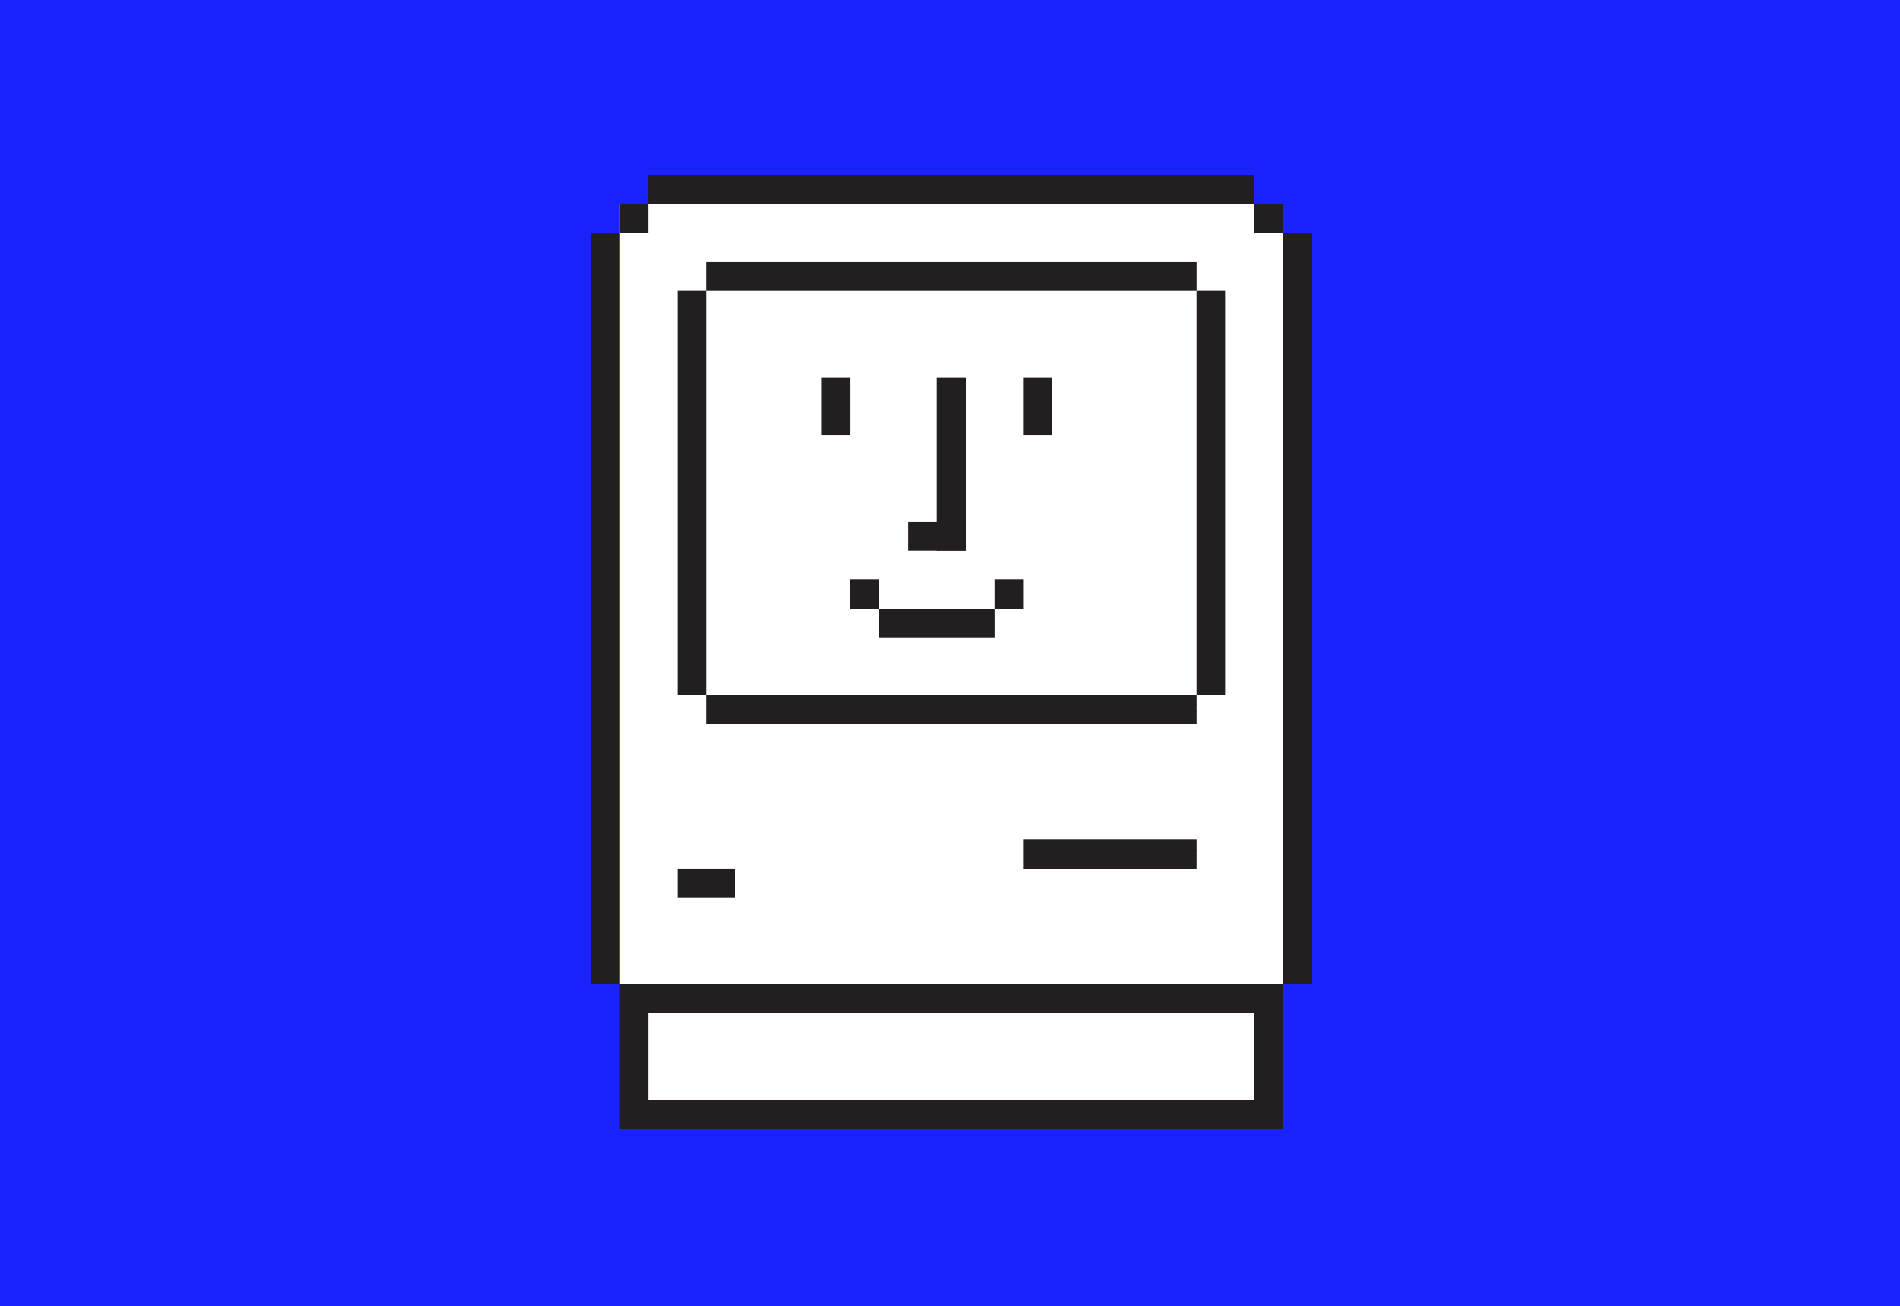 Icons designed by Susan Kare